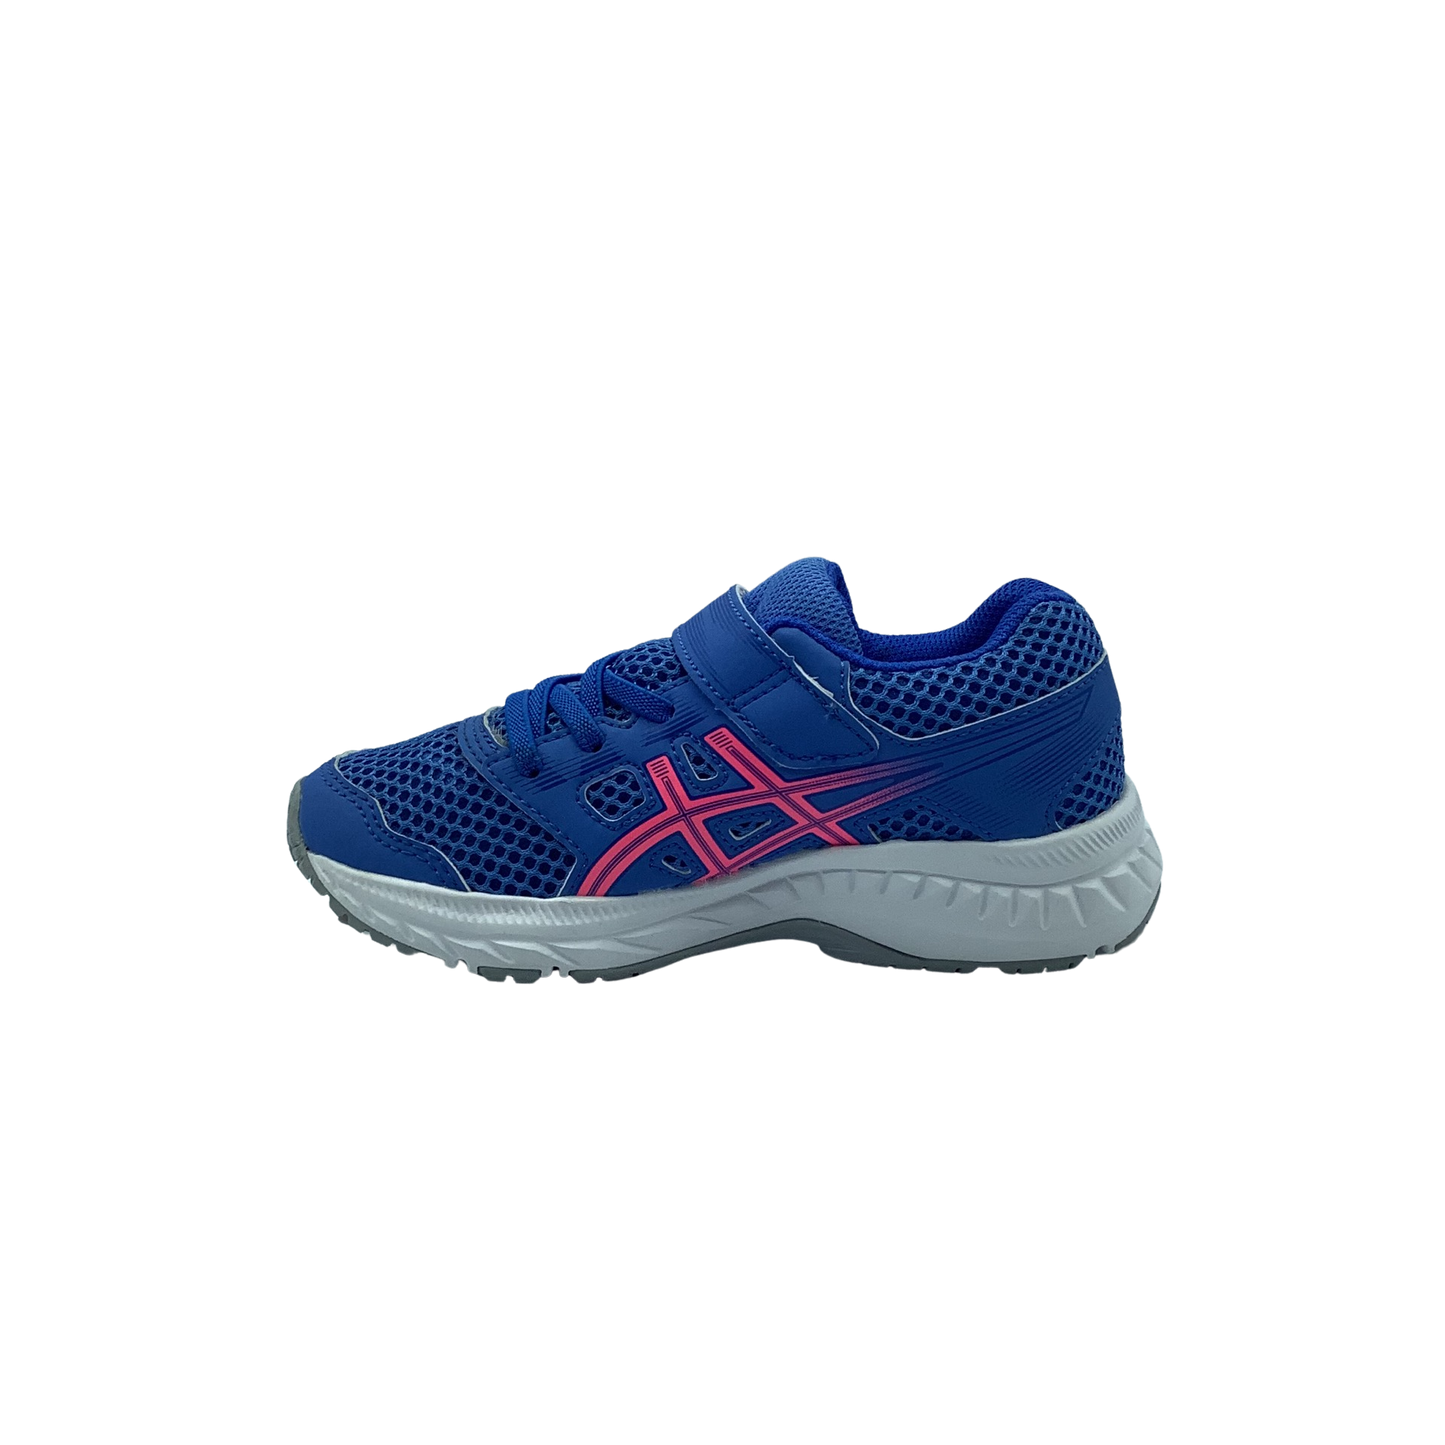 Asics CONTEND 5 PS